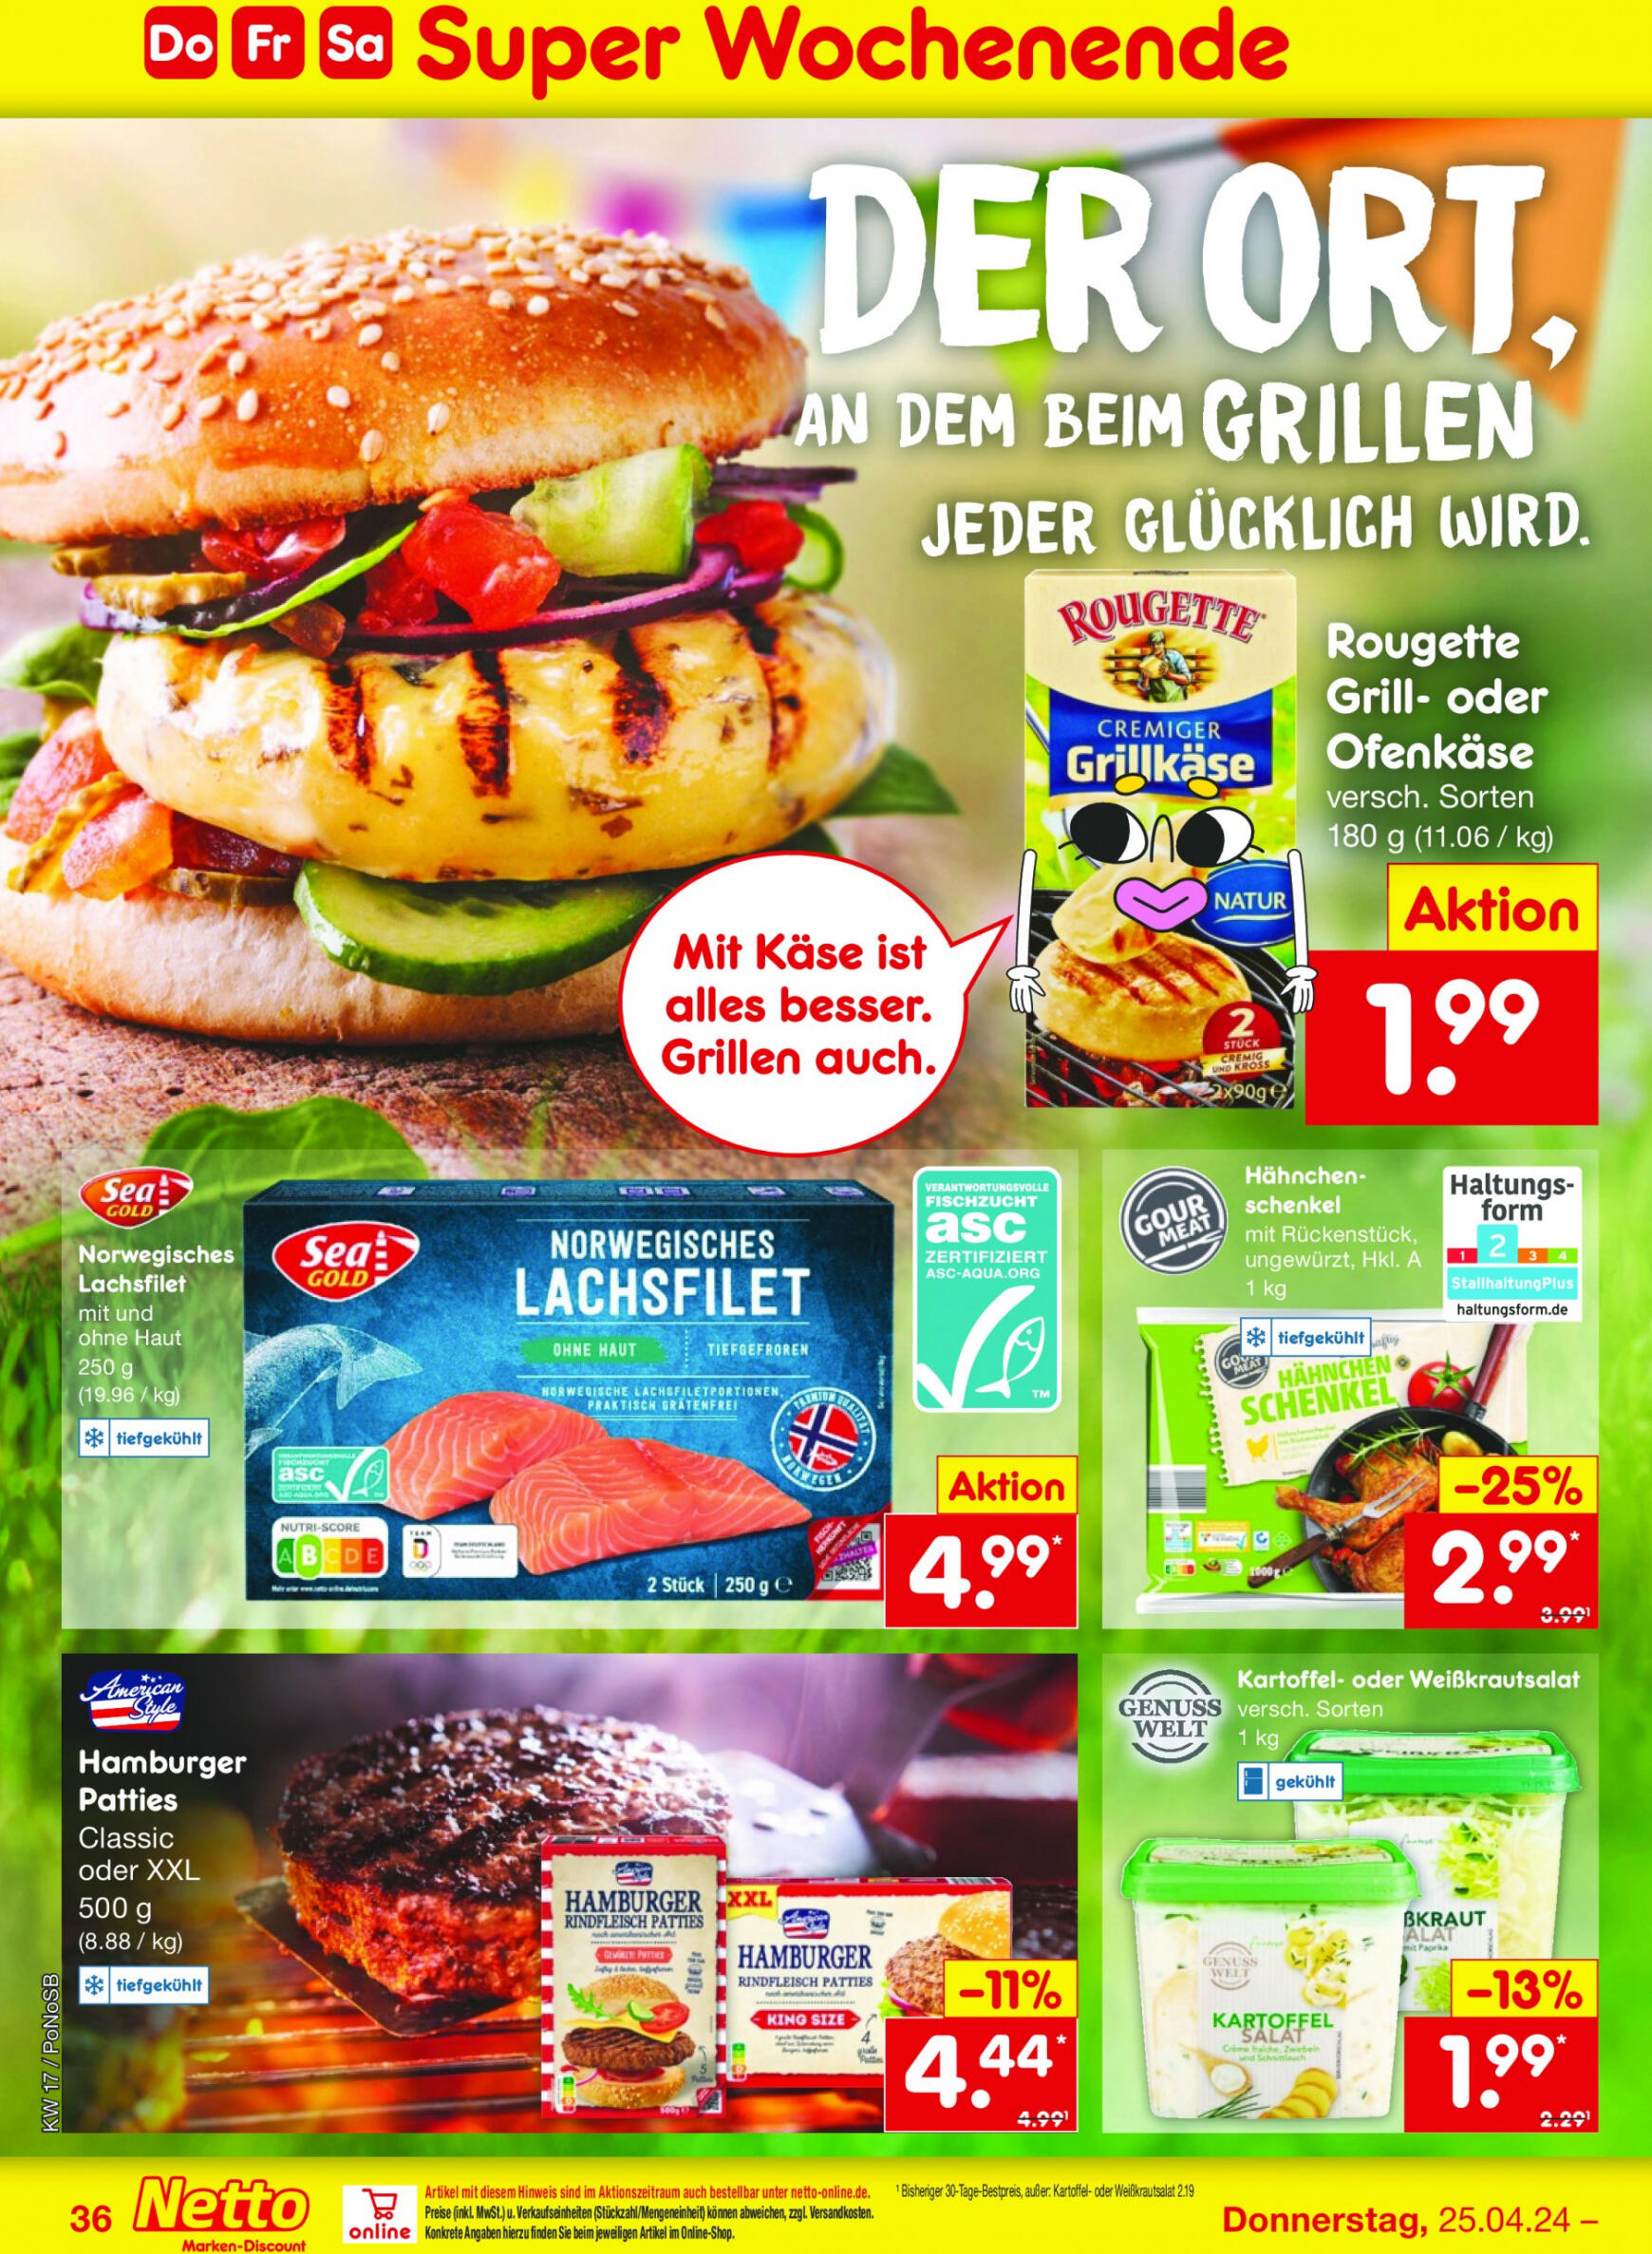 netto - Flyer Netto aktuell 22.04. - 27.04. - page: 42